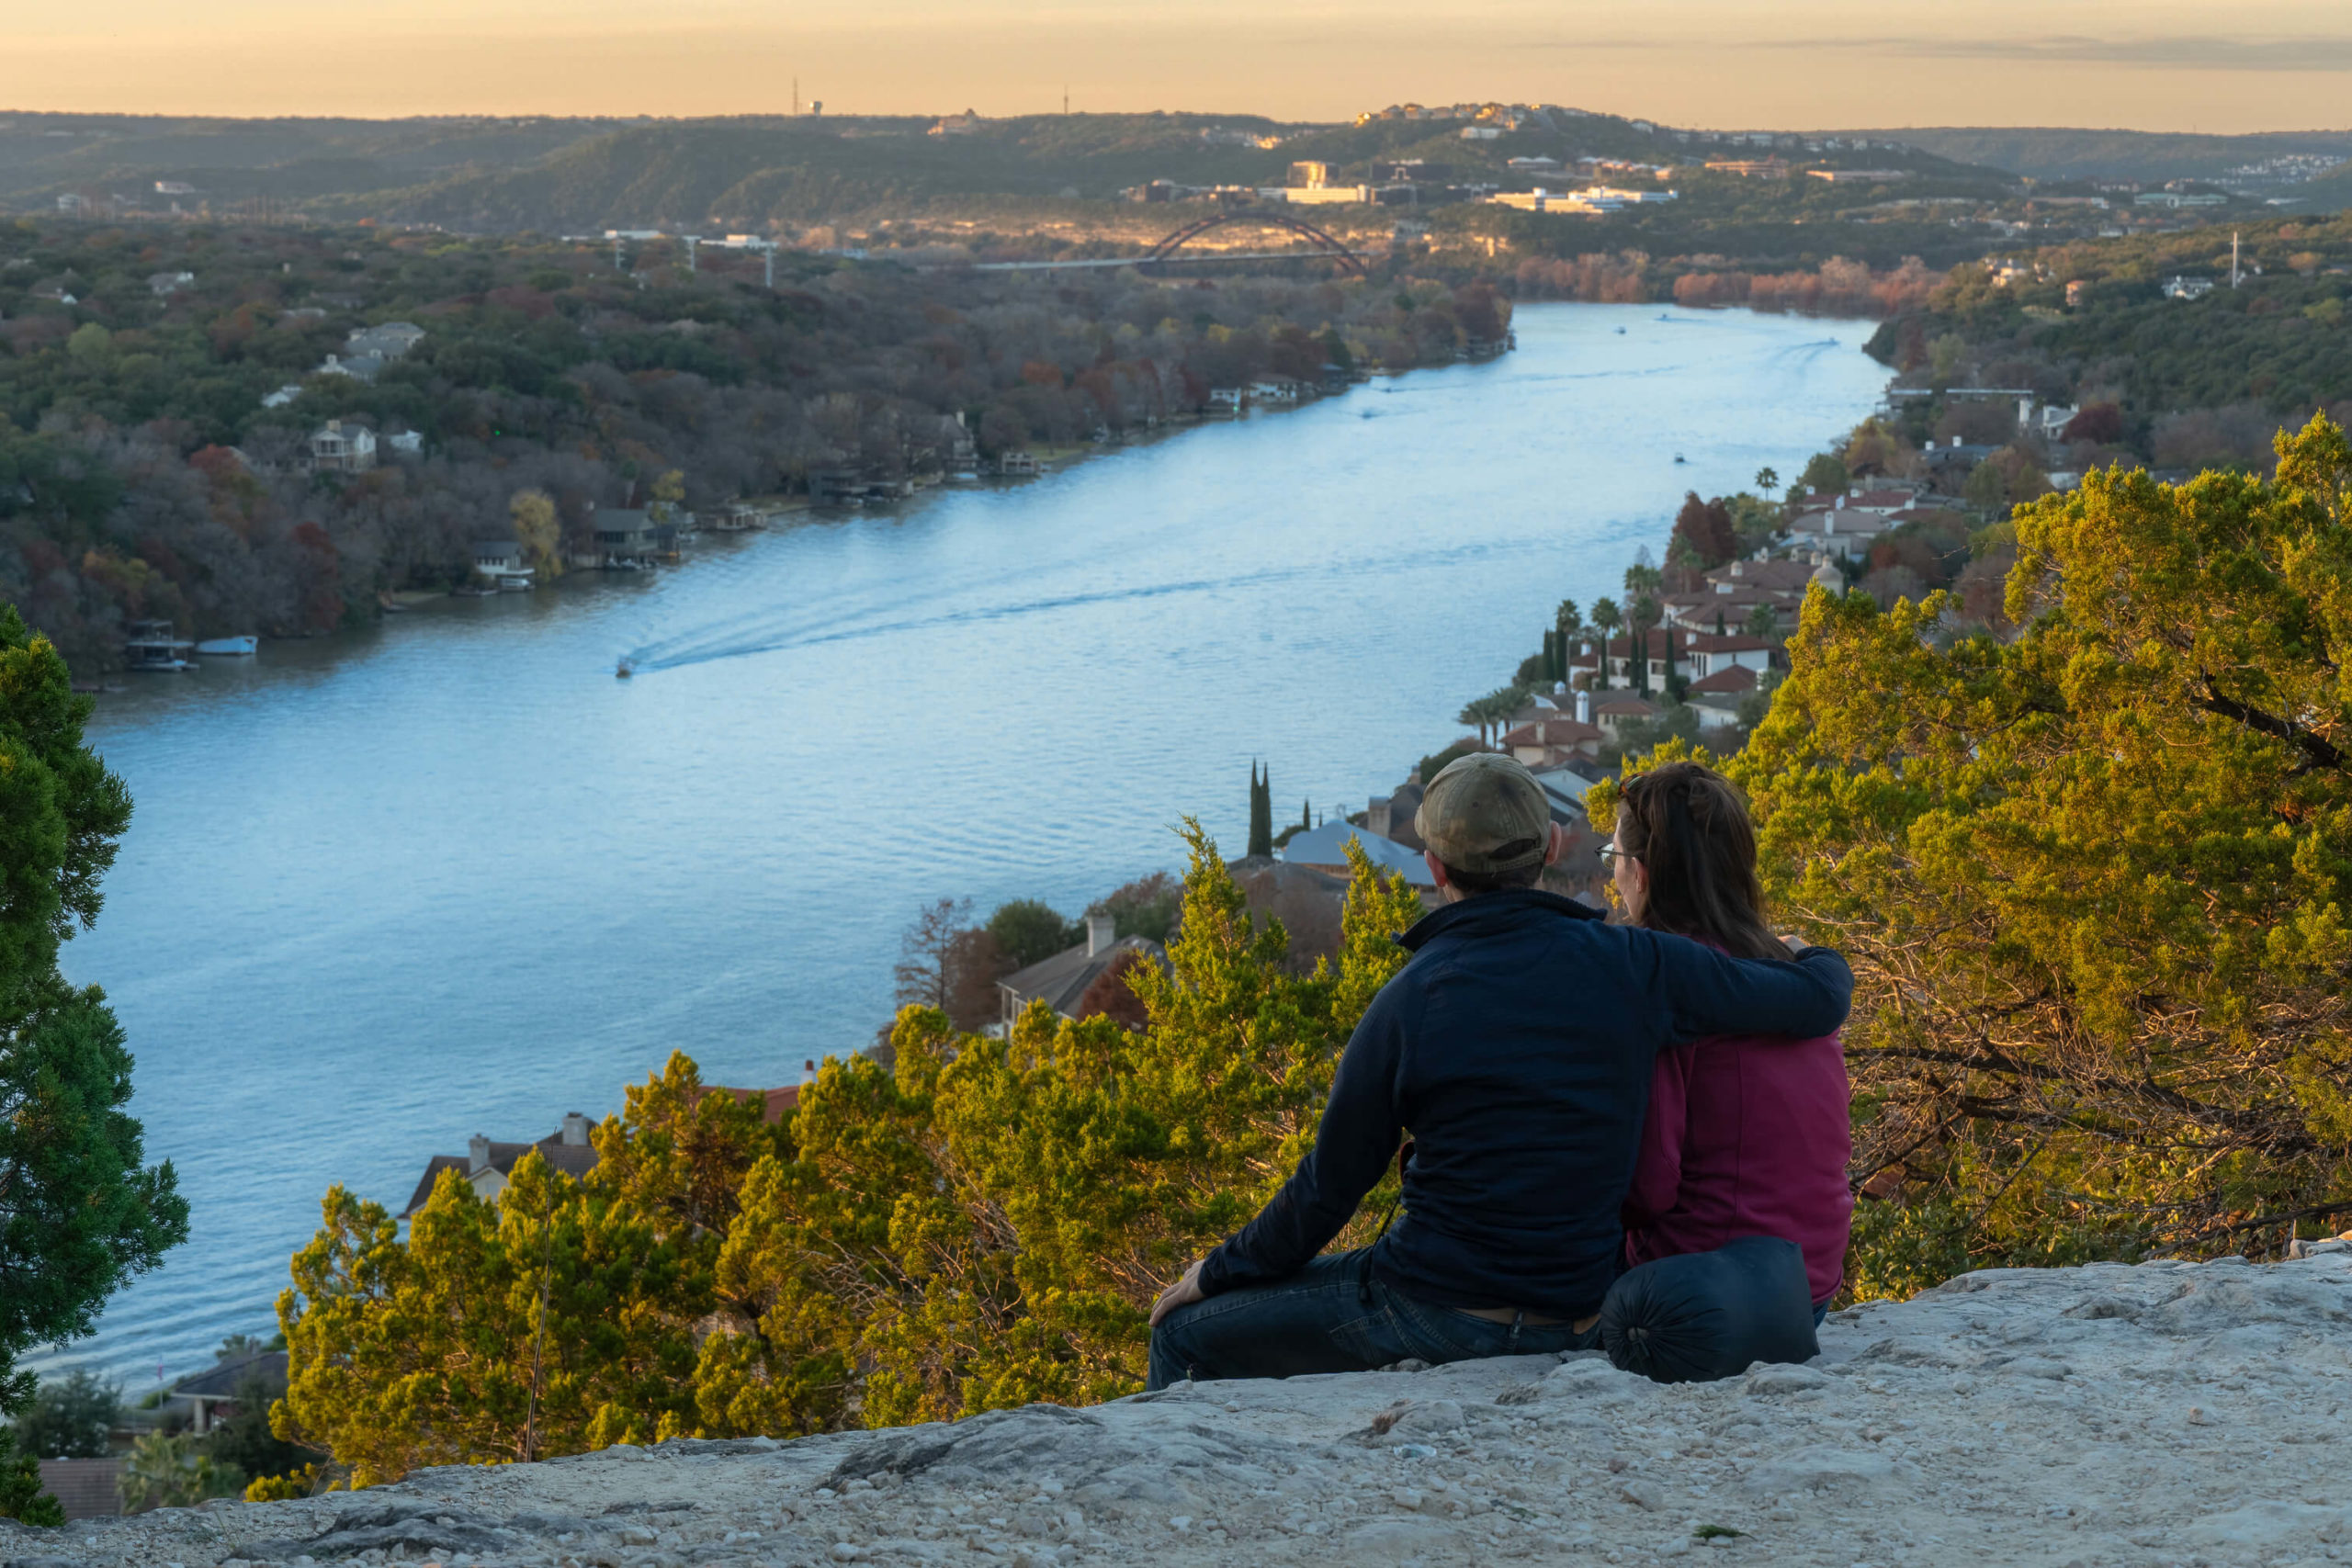 Couple on a hill overlooking a river.